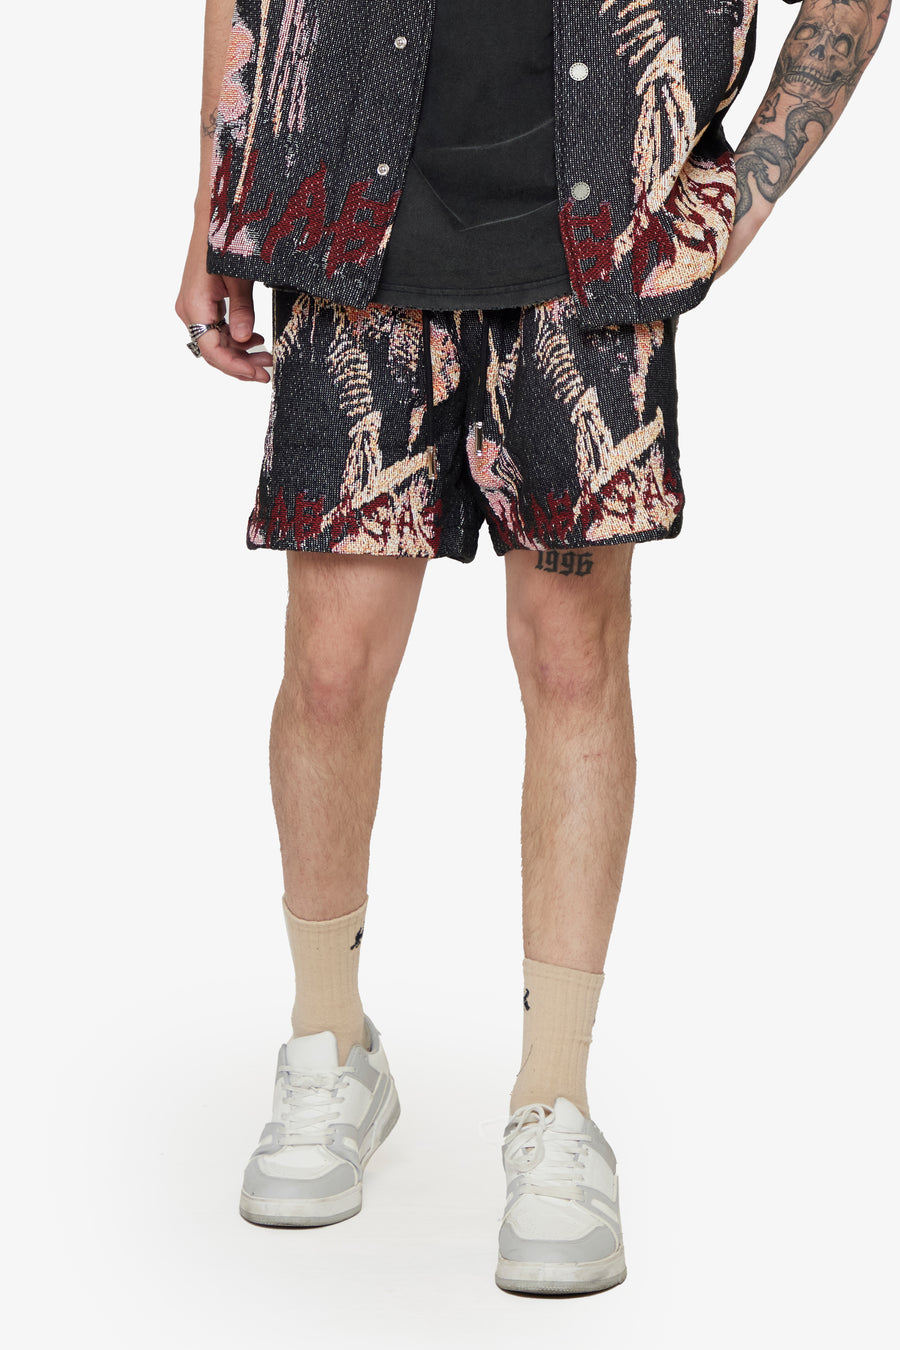 "GHOST HANDS" BLACK TAPESTRY SHORTS